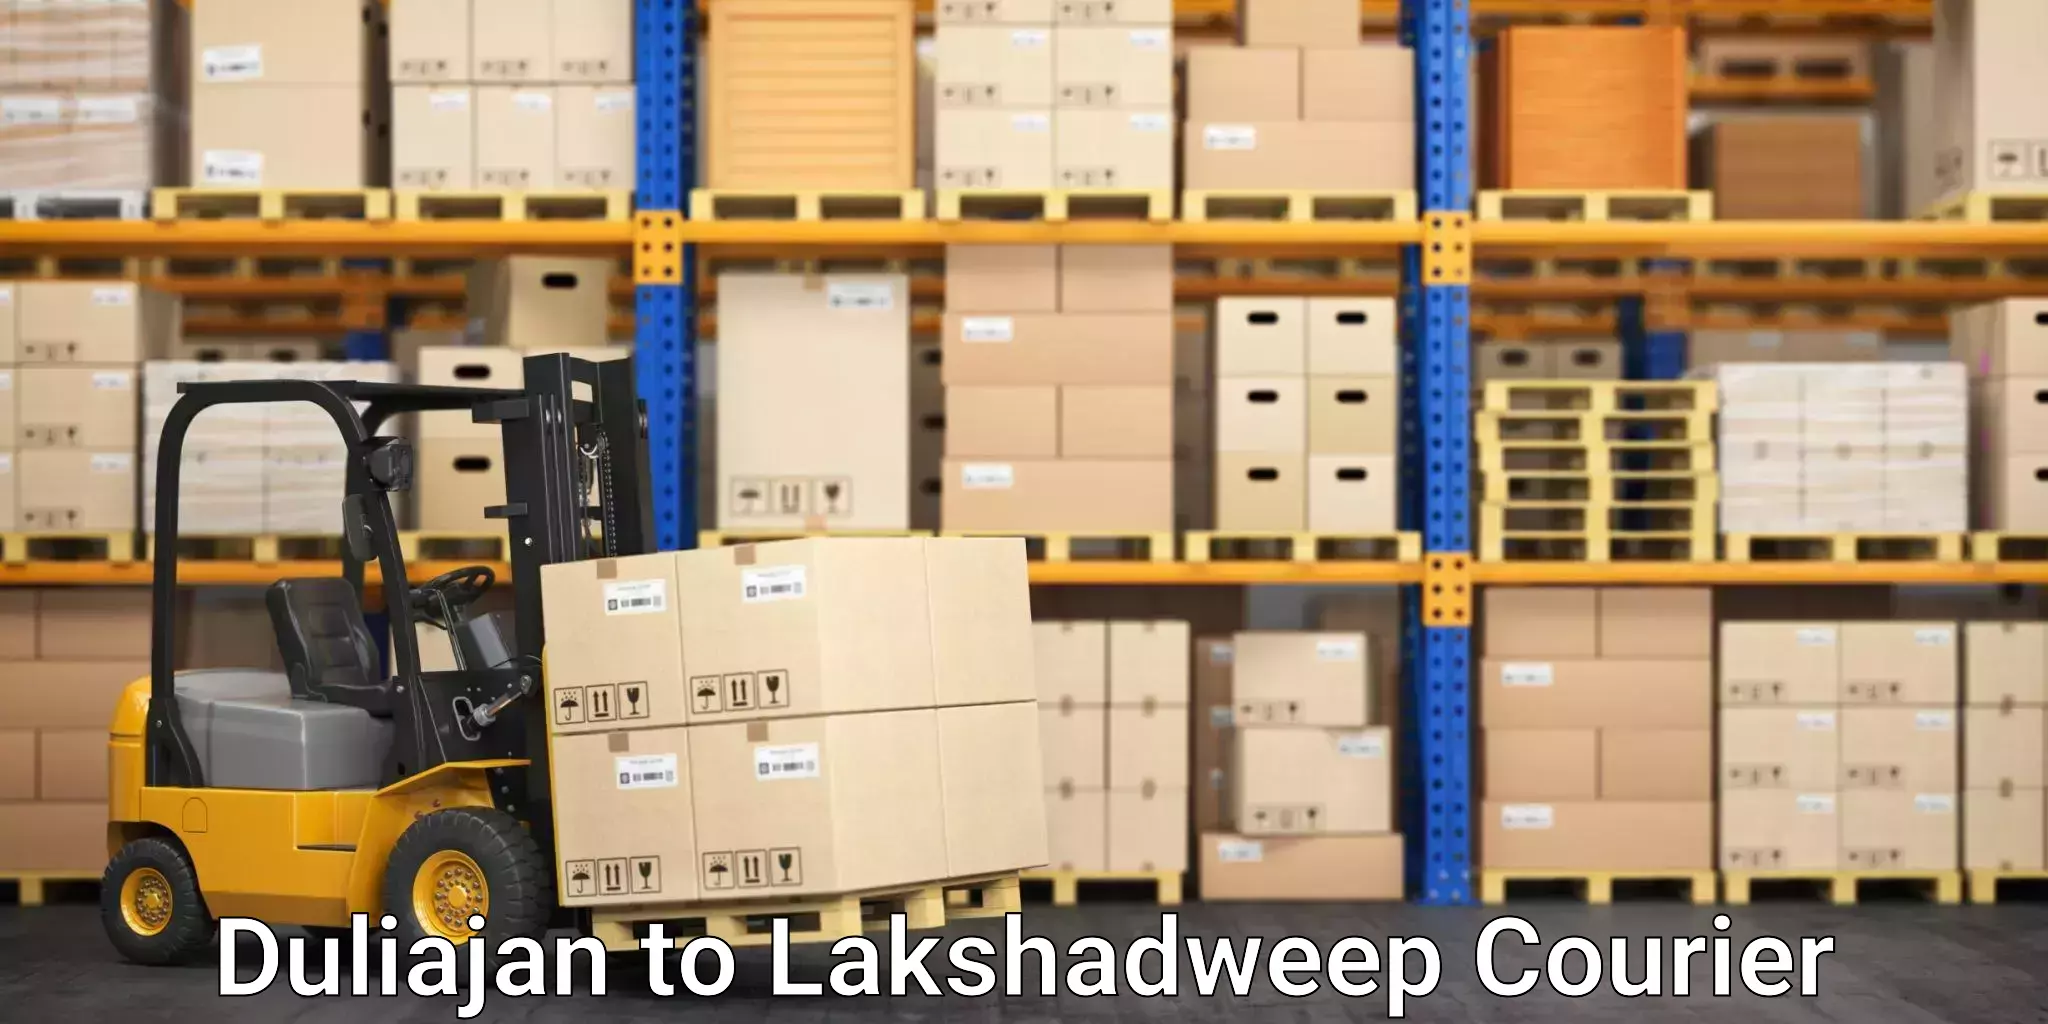 State-of-the-art courier technology in Duliajan to Lakshadweep